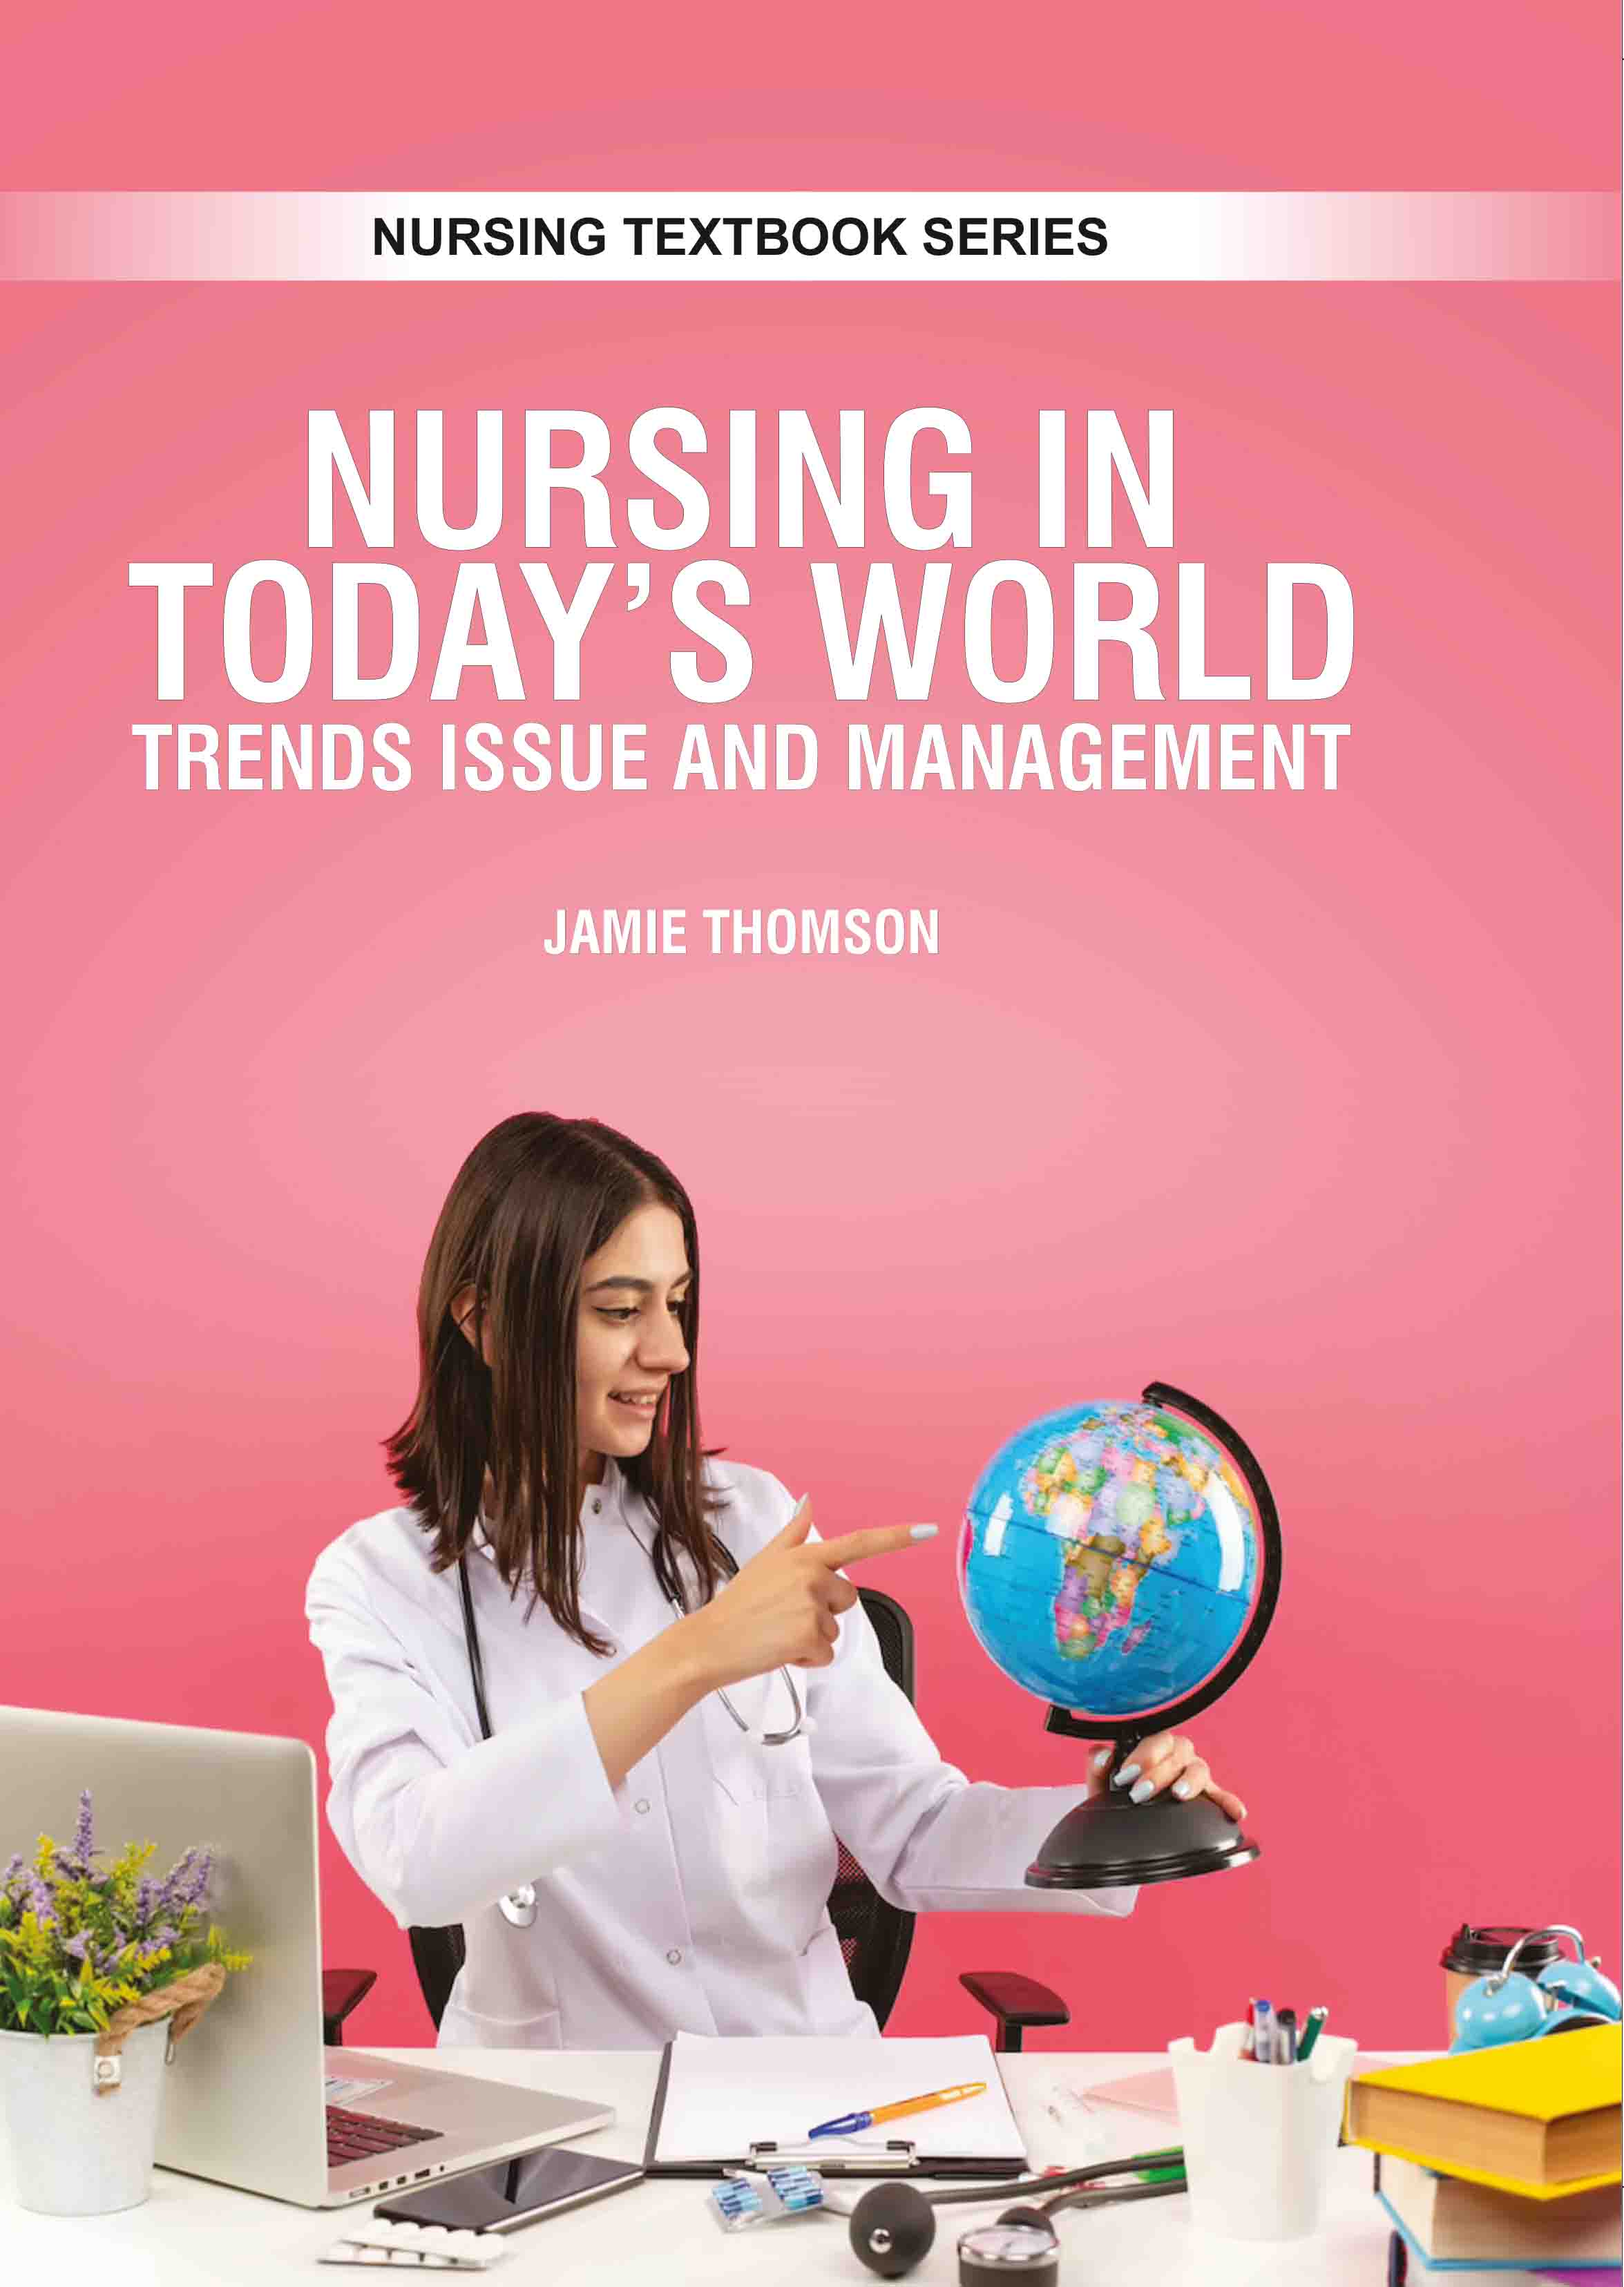 Nursing in Today's World: Trends, Issue & Management